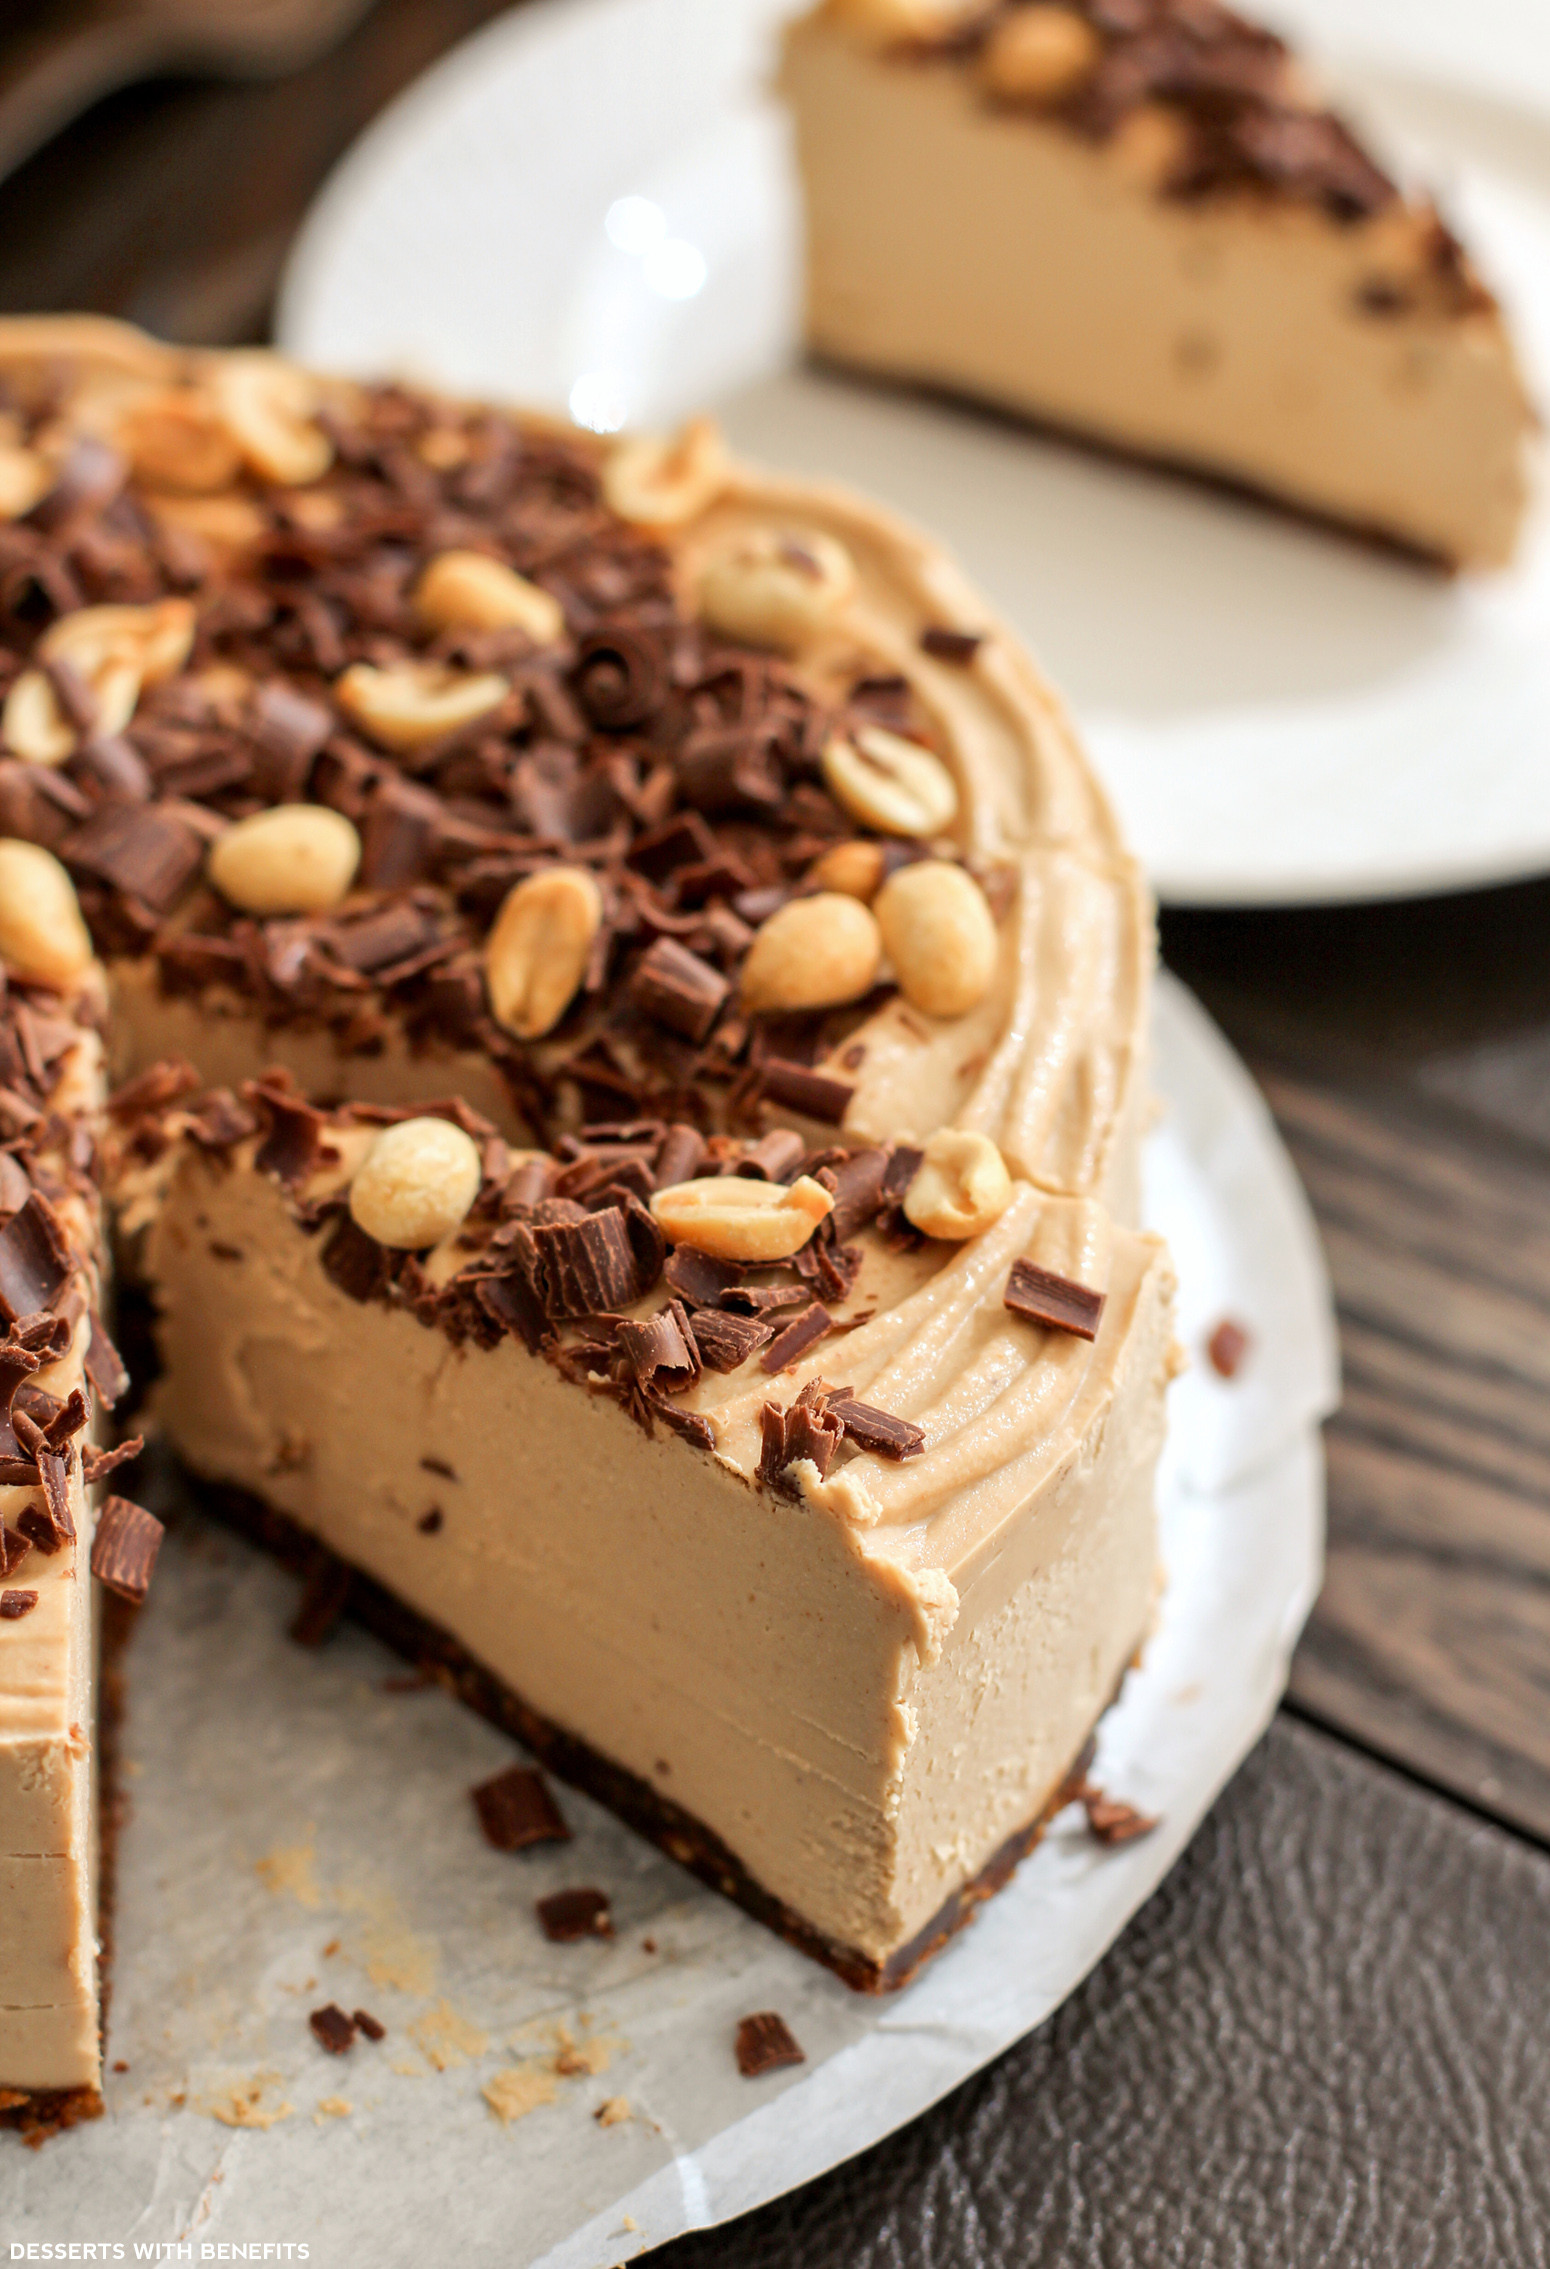 Healthy Peanut Butter Desserts
 Healthy Chocolate Peanut Butter Raw Cheesecake